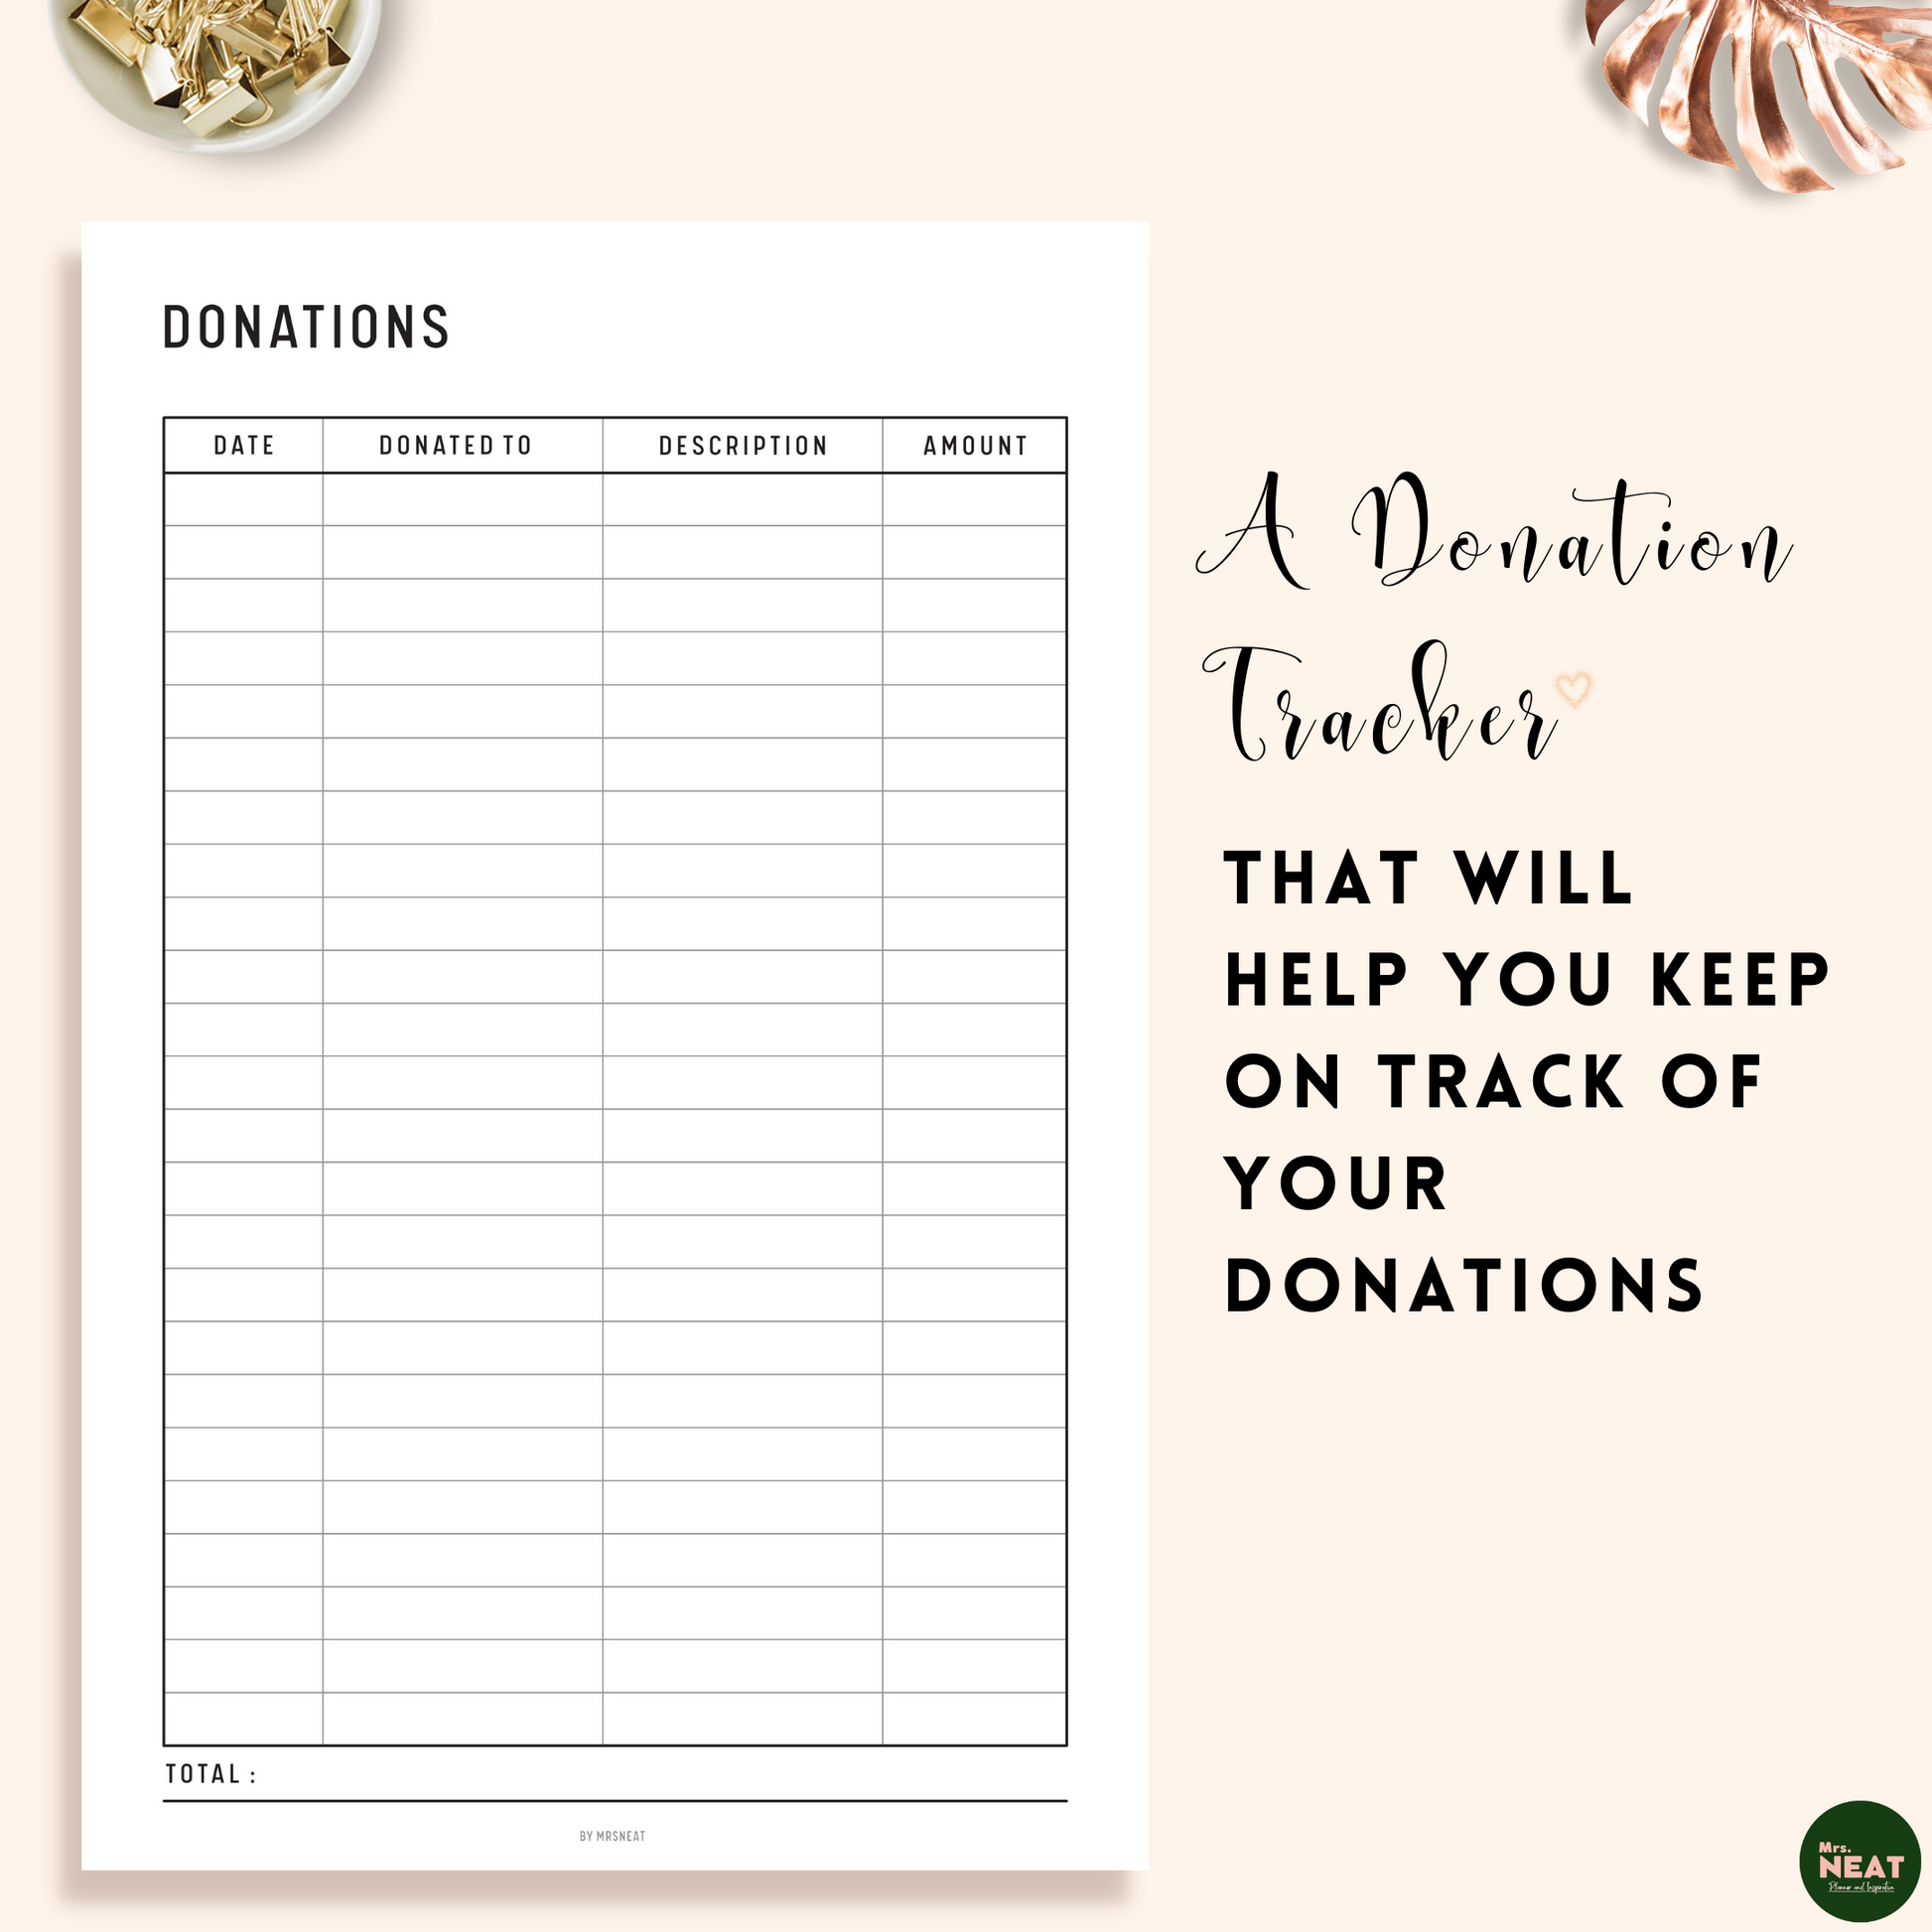 Donation Tracker Planner with room for date, Donated to, Description, amount and total donation